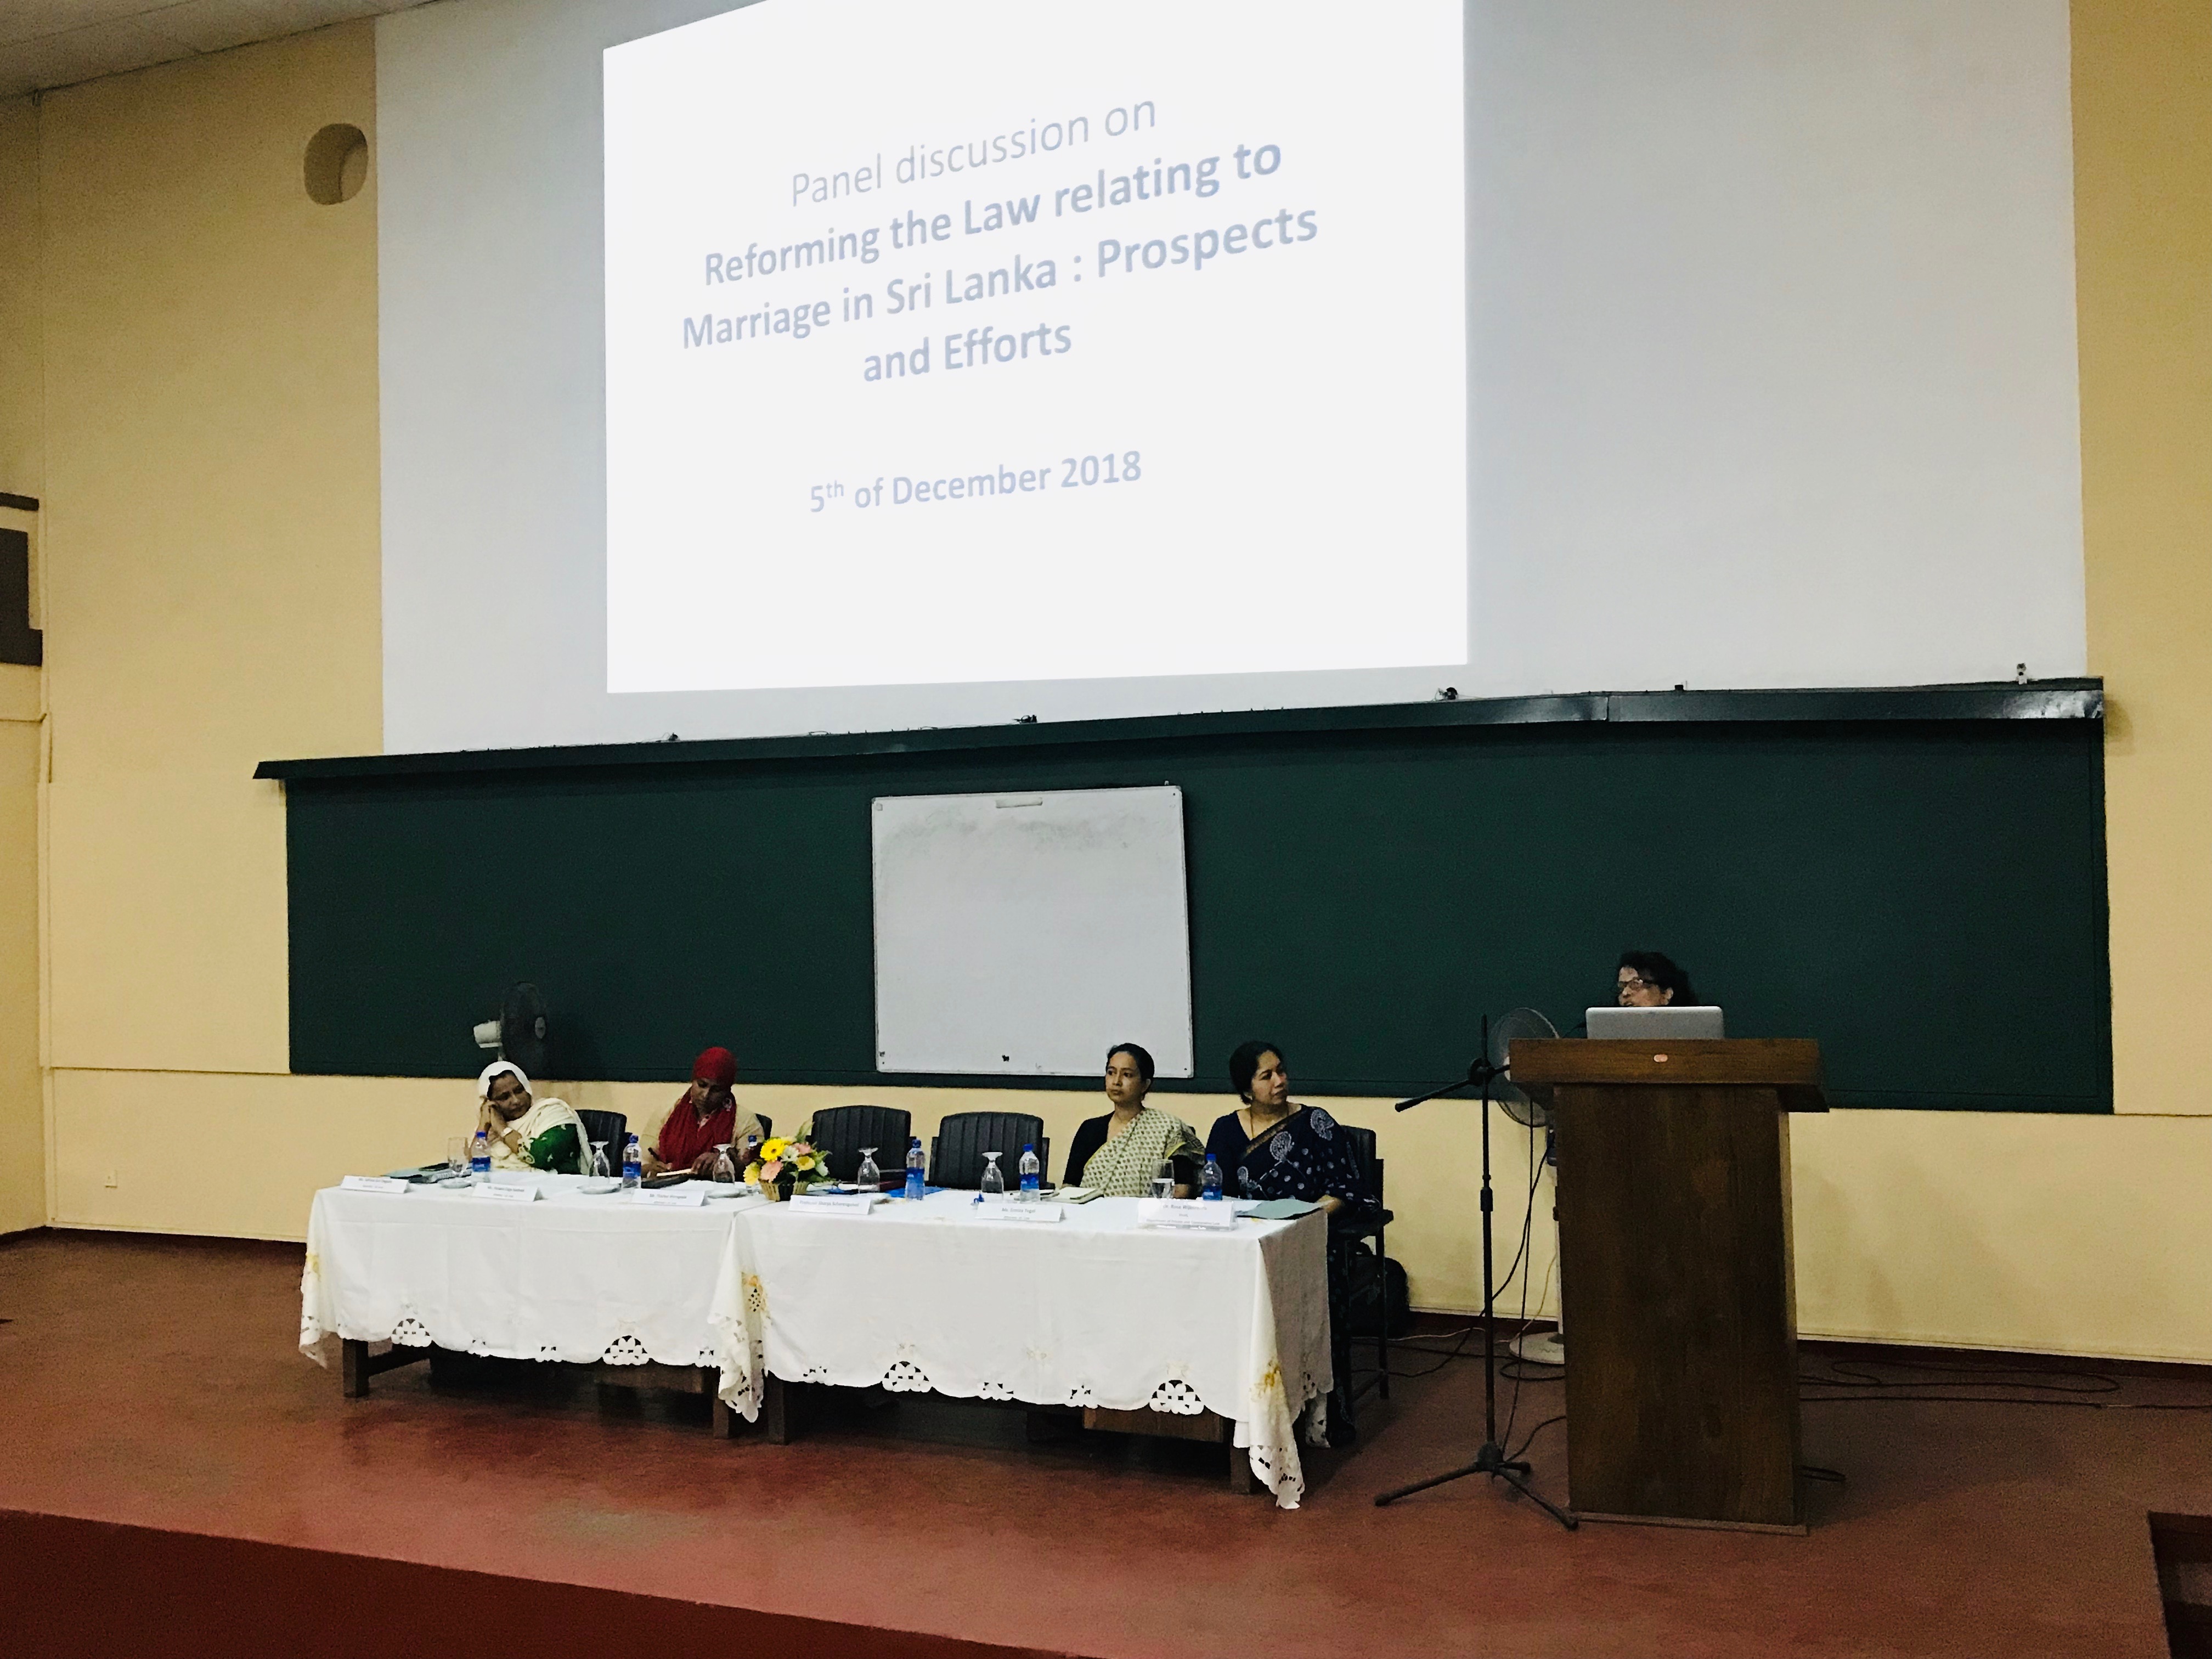 Panel discussion on Marriage Law Reforms in Sri Lanka